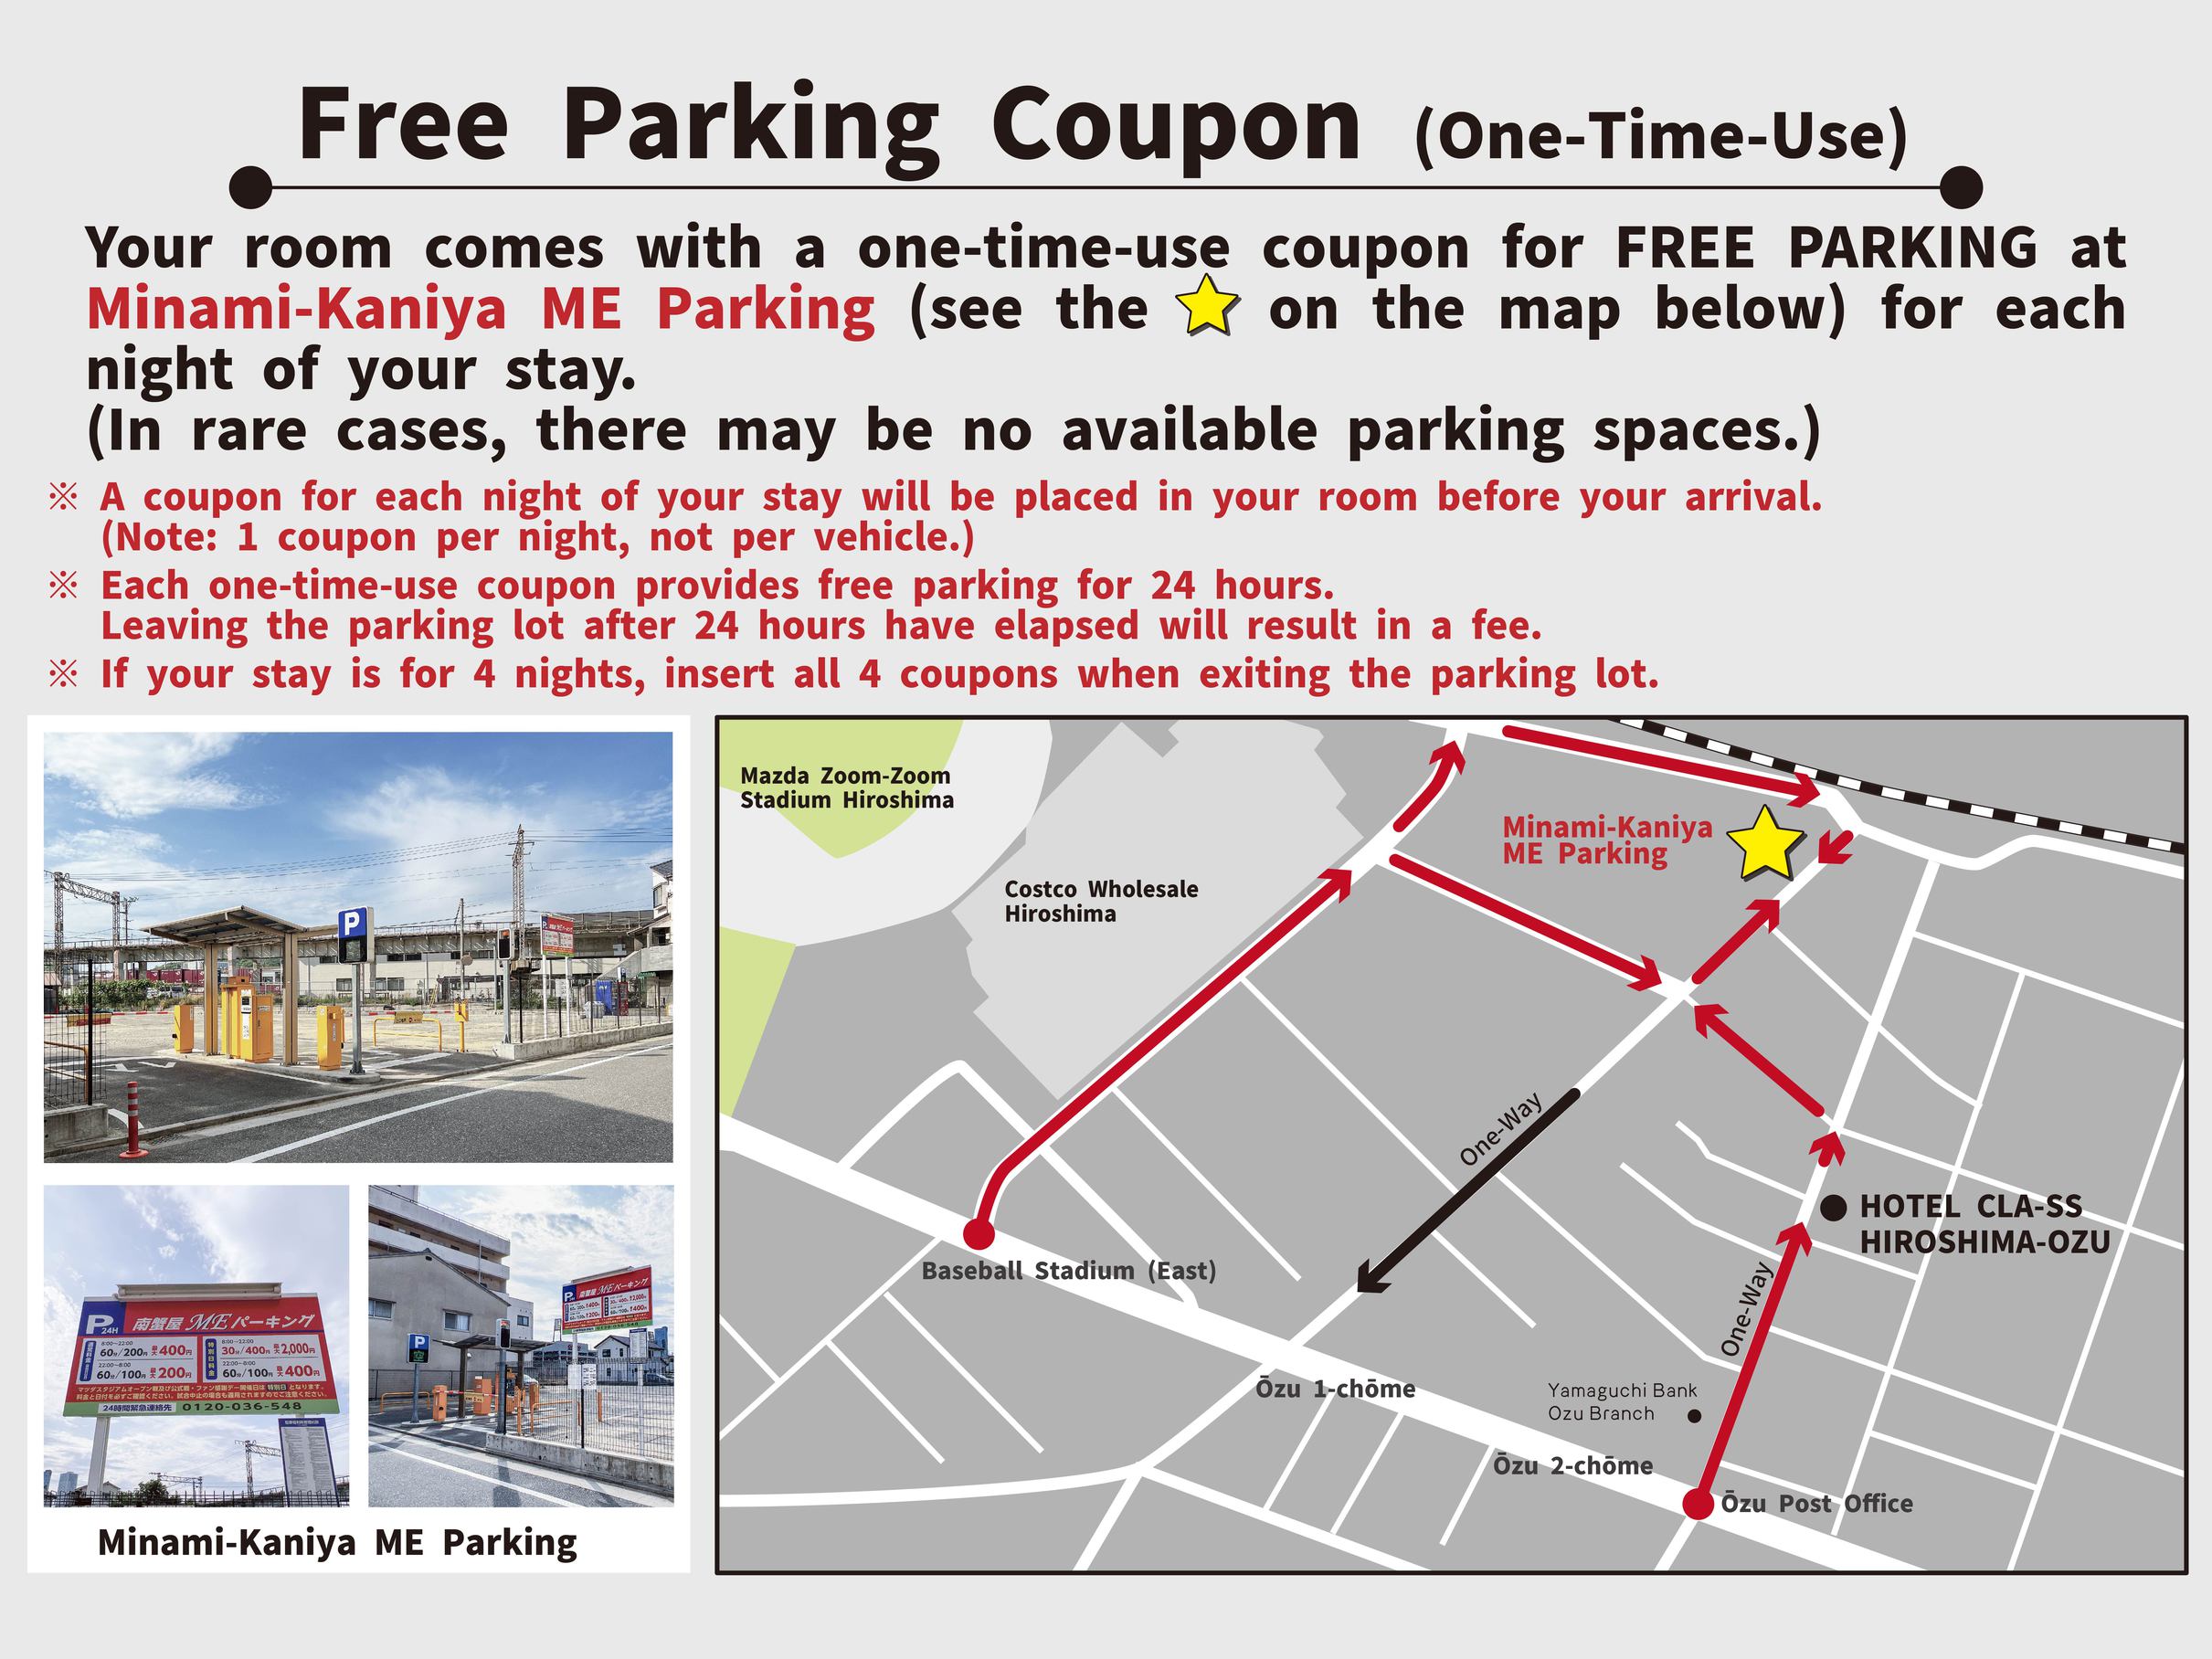 Parking Lot Directions (English)